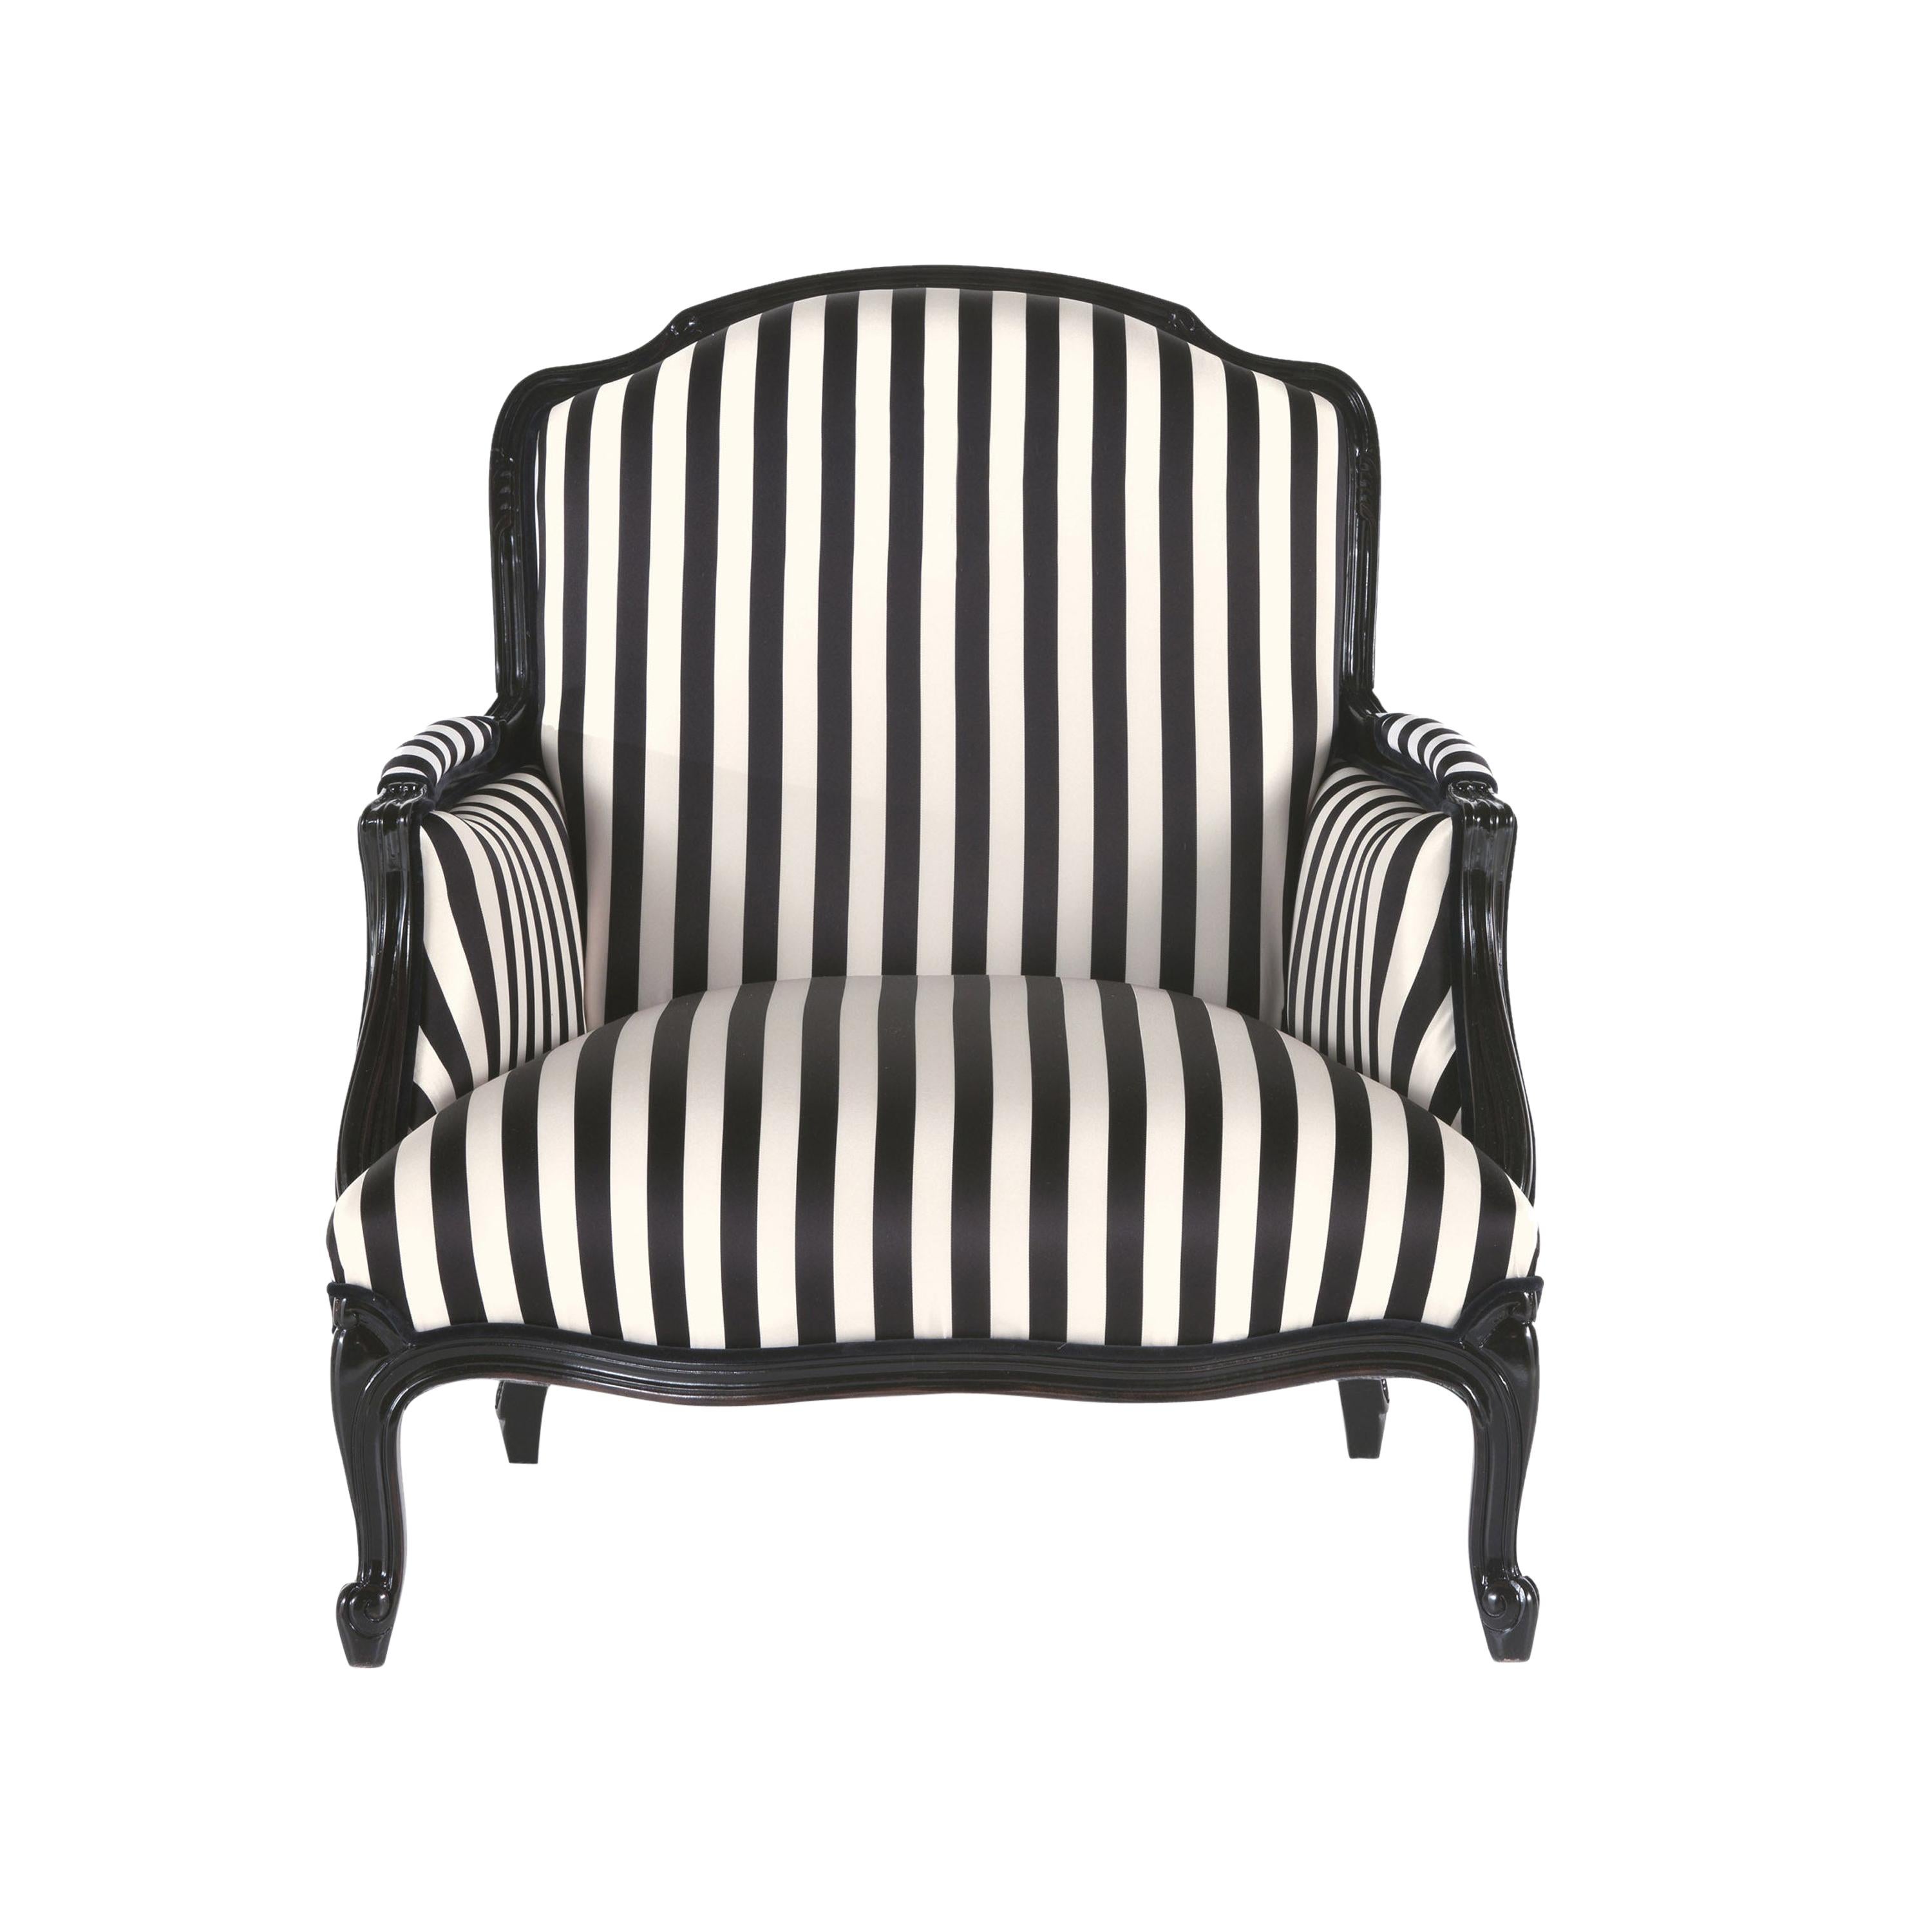 Gianfranco Ferré Home Welcome Armchair in Black & White Jacquard Fabric For Sale